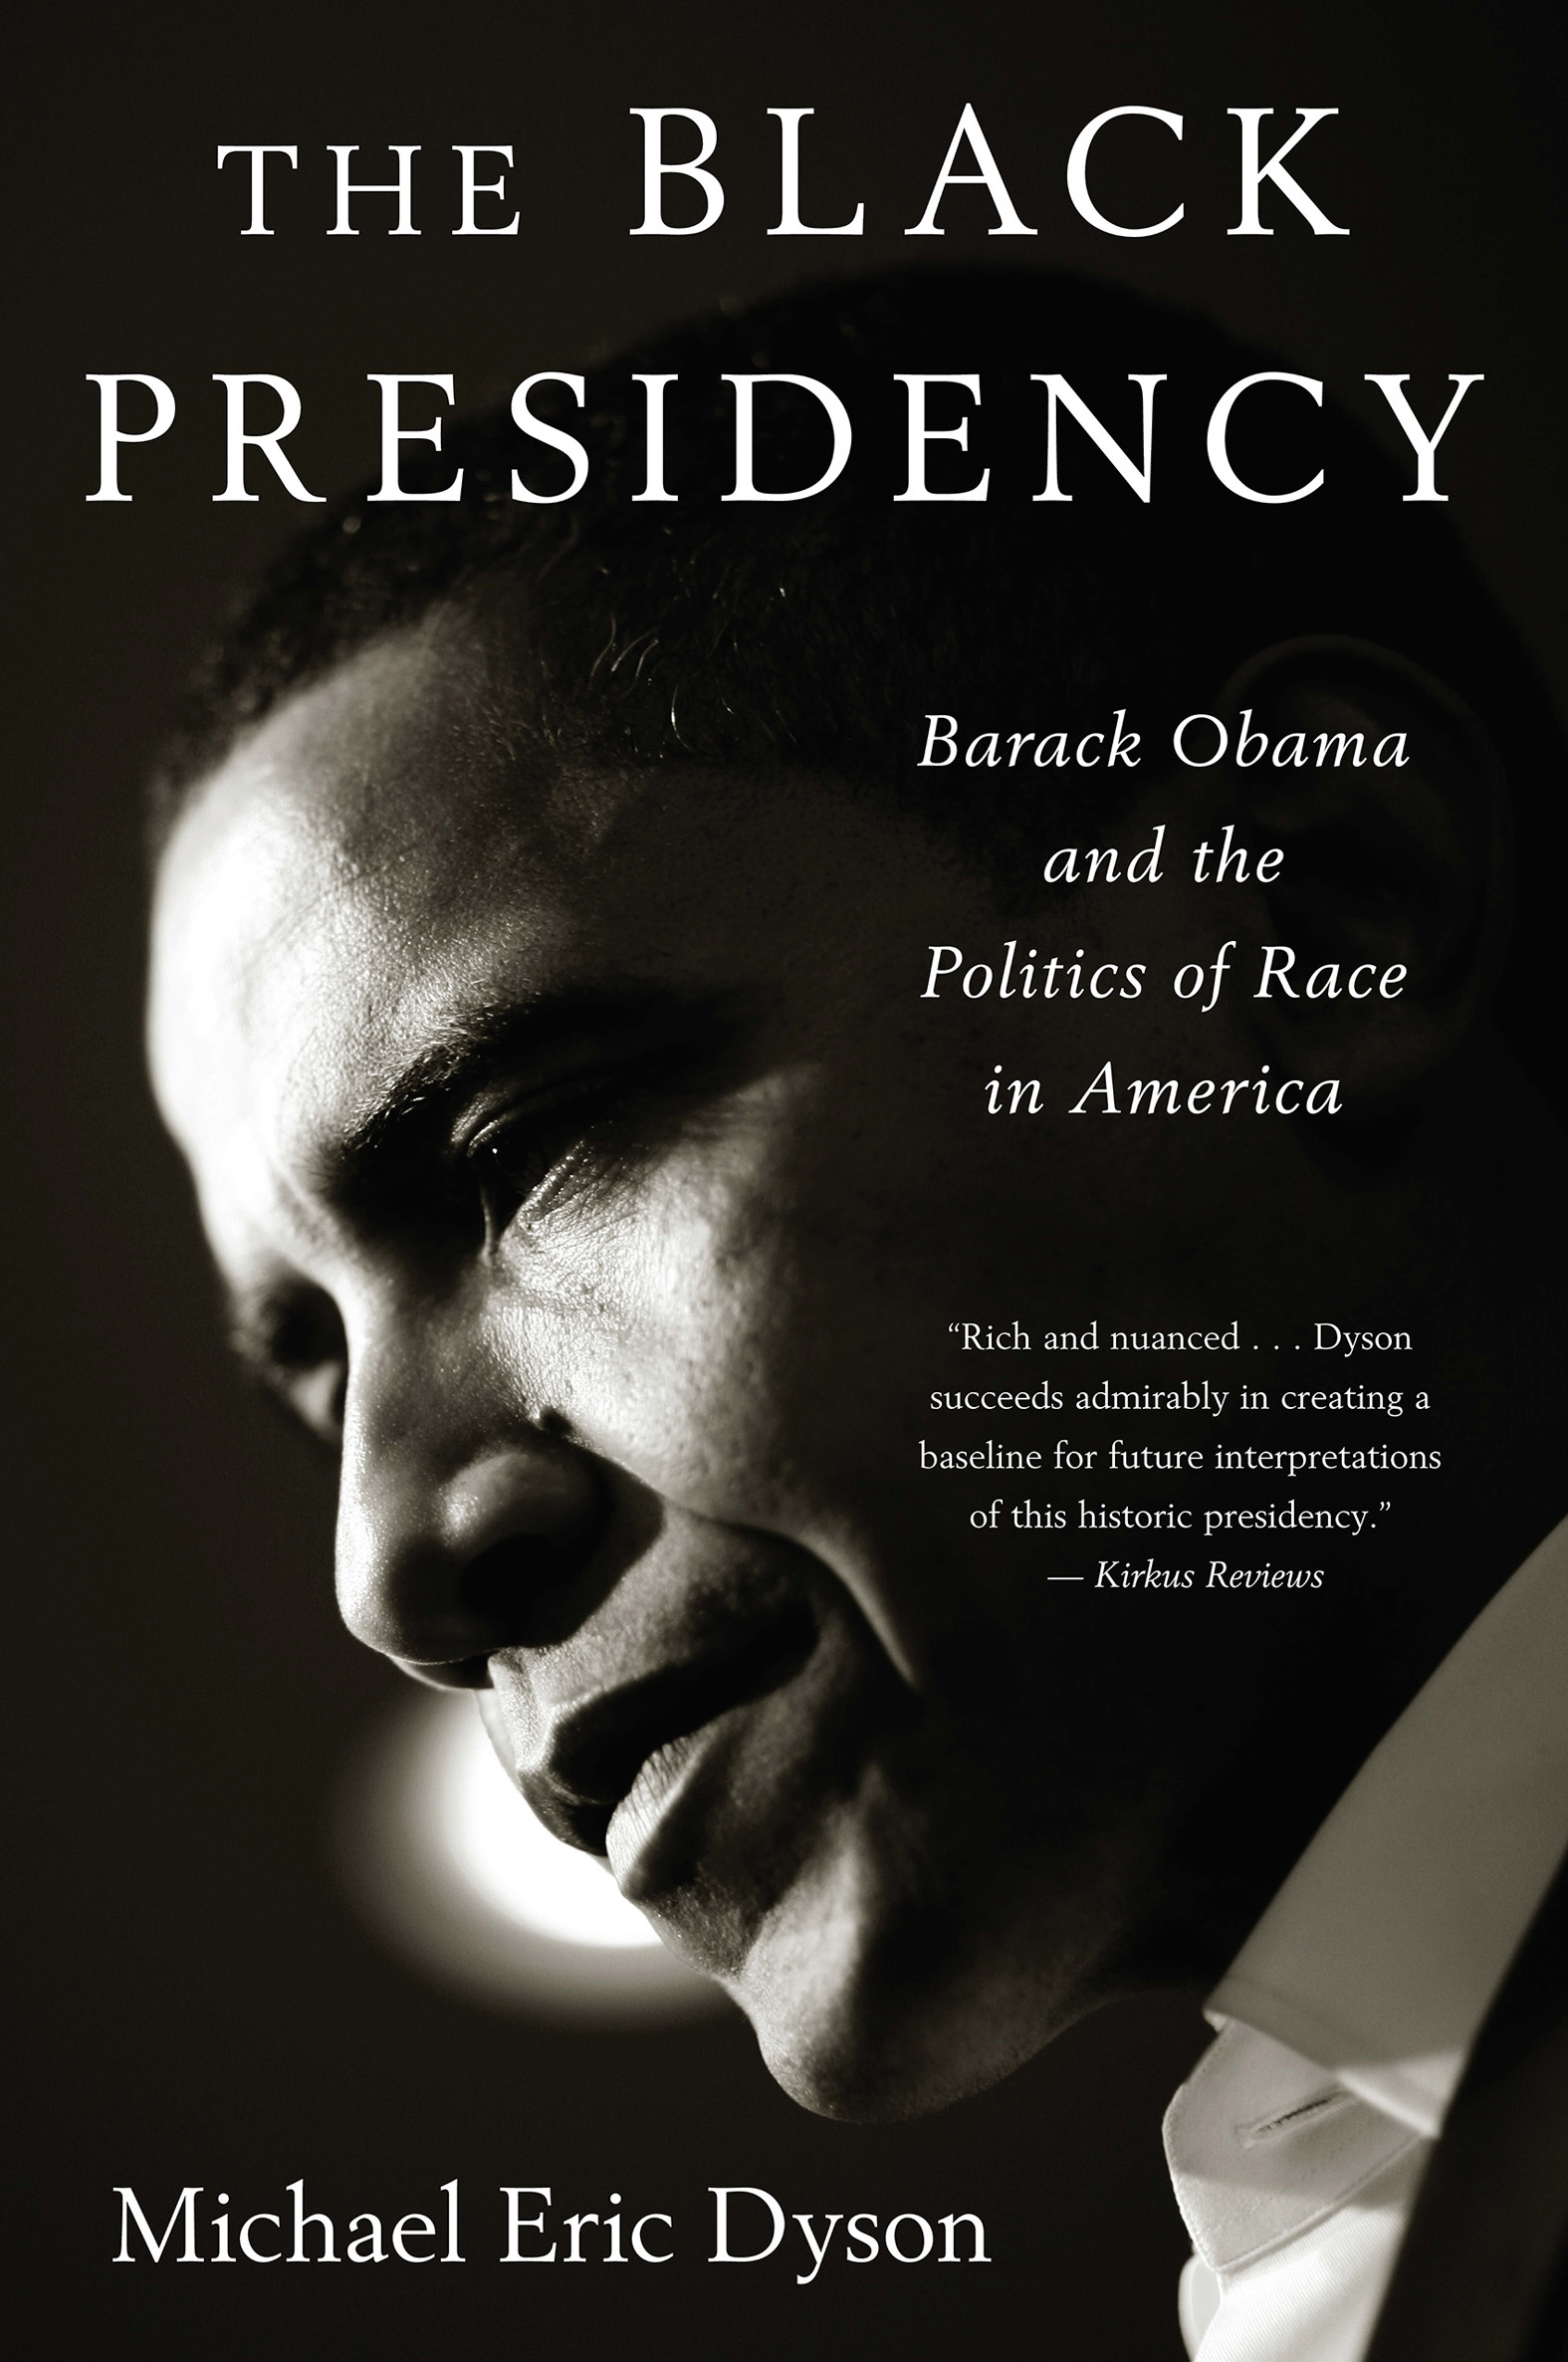 Image de couverture de The Black Presidency [electronic resource] : Barack Obama and the Politics of Race in America